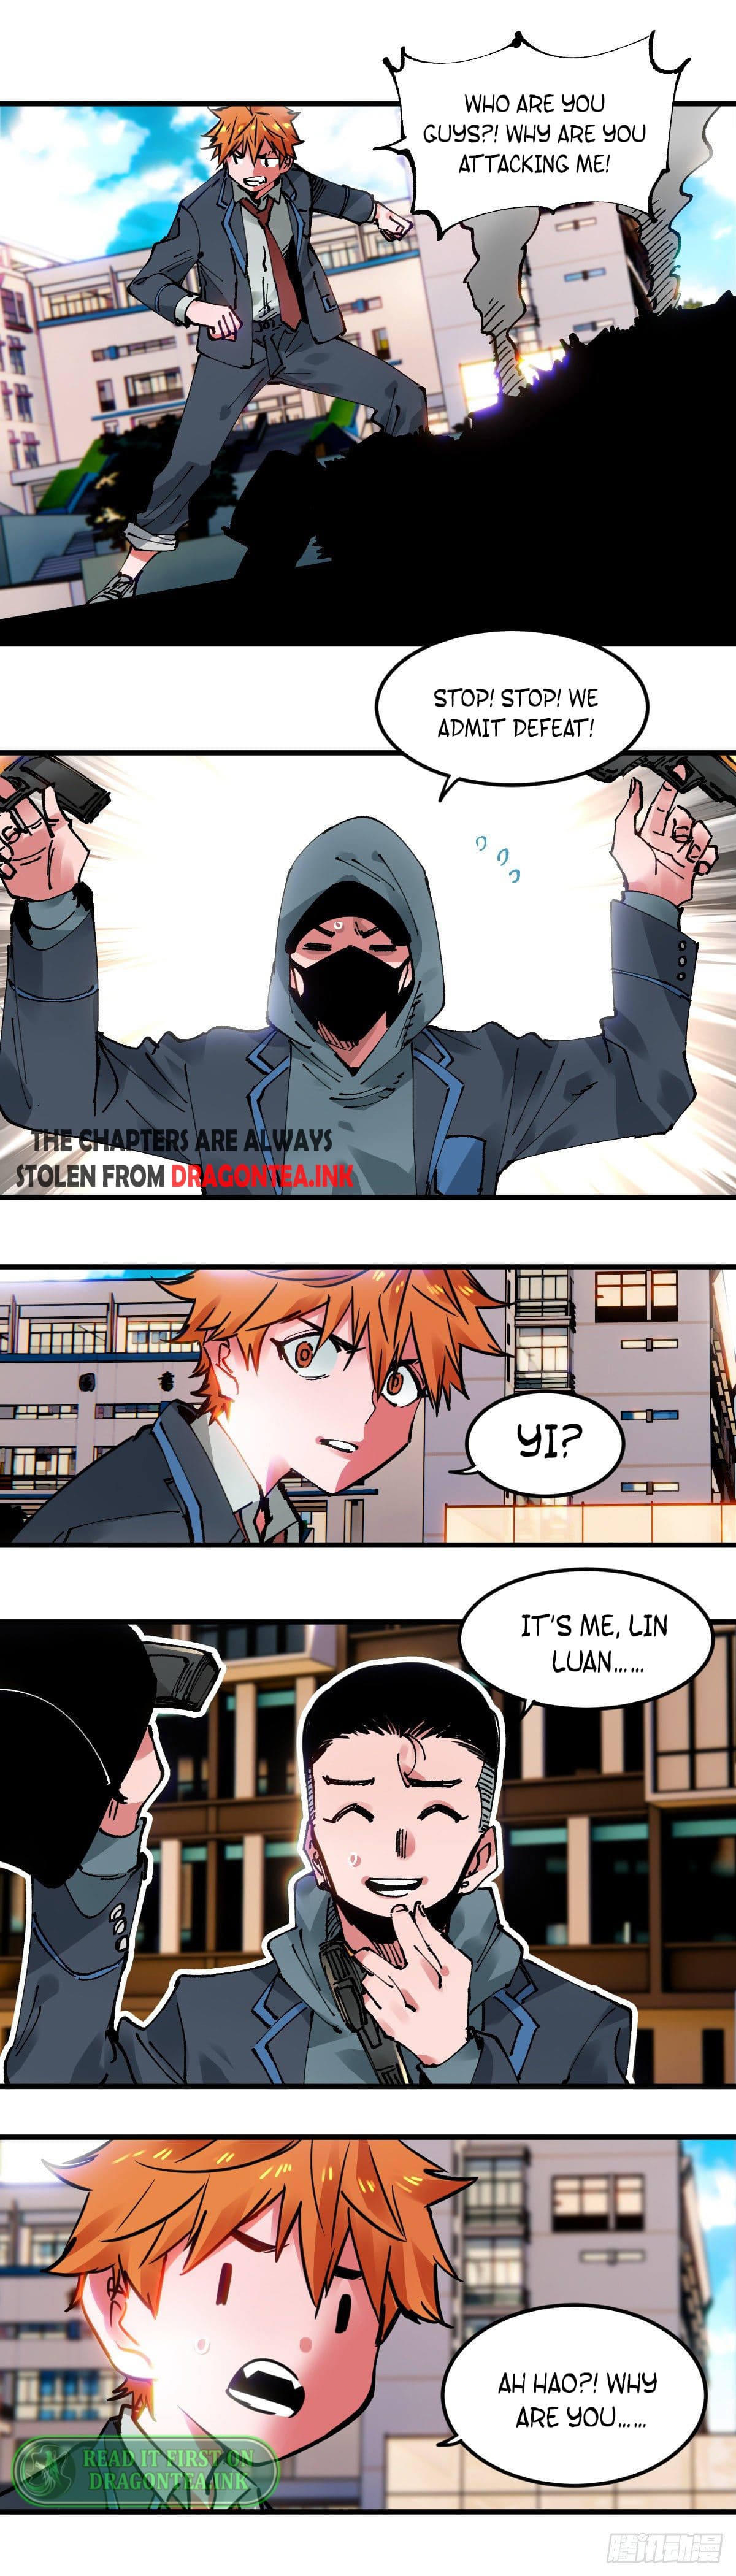 It Feels Wrong To Bite Someone Chapter 93